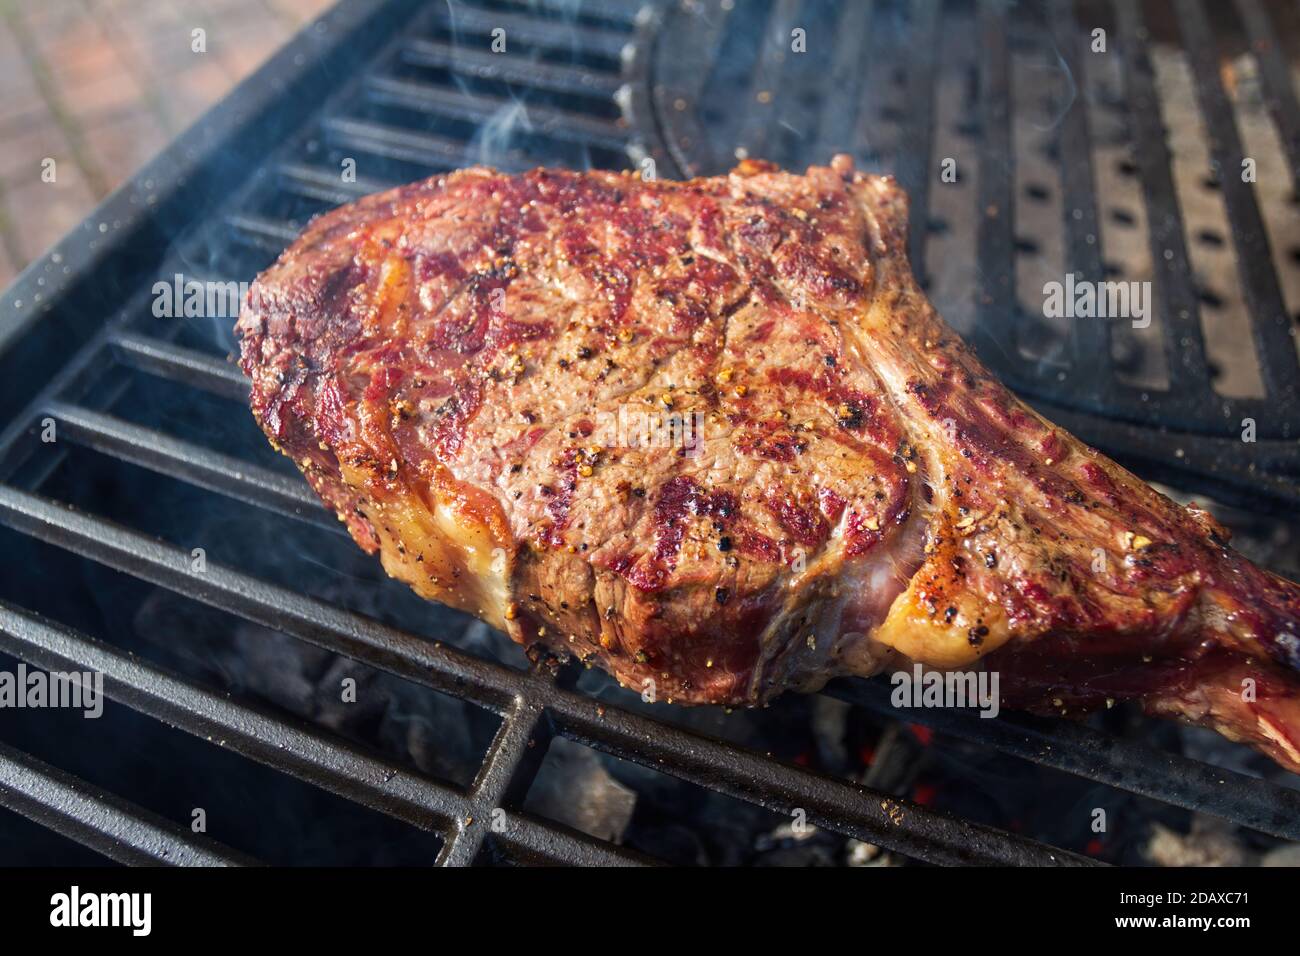 Dry Aged Barbecue Tomahawk Steak on grill Stock Photo